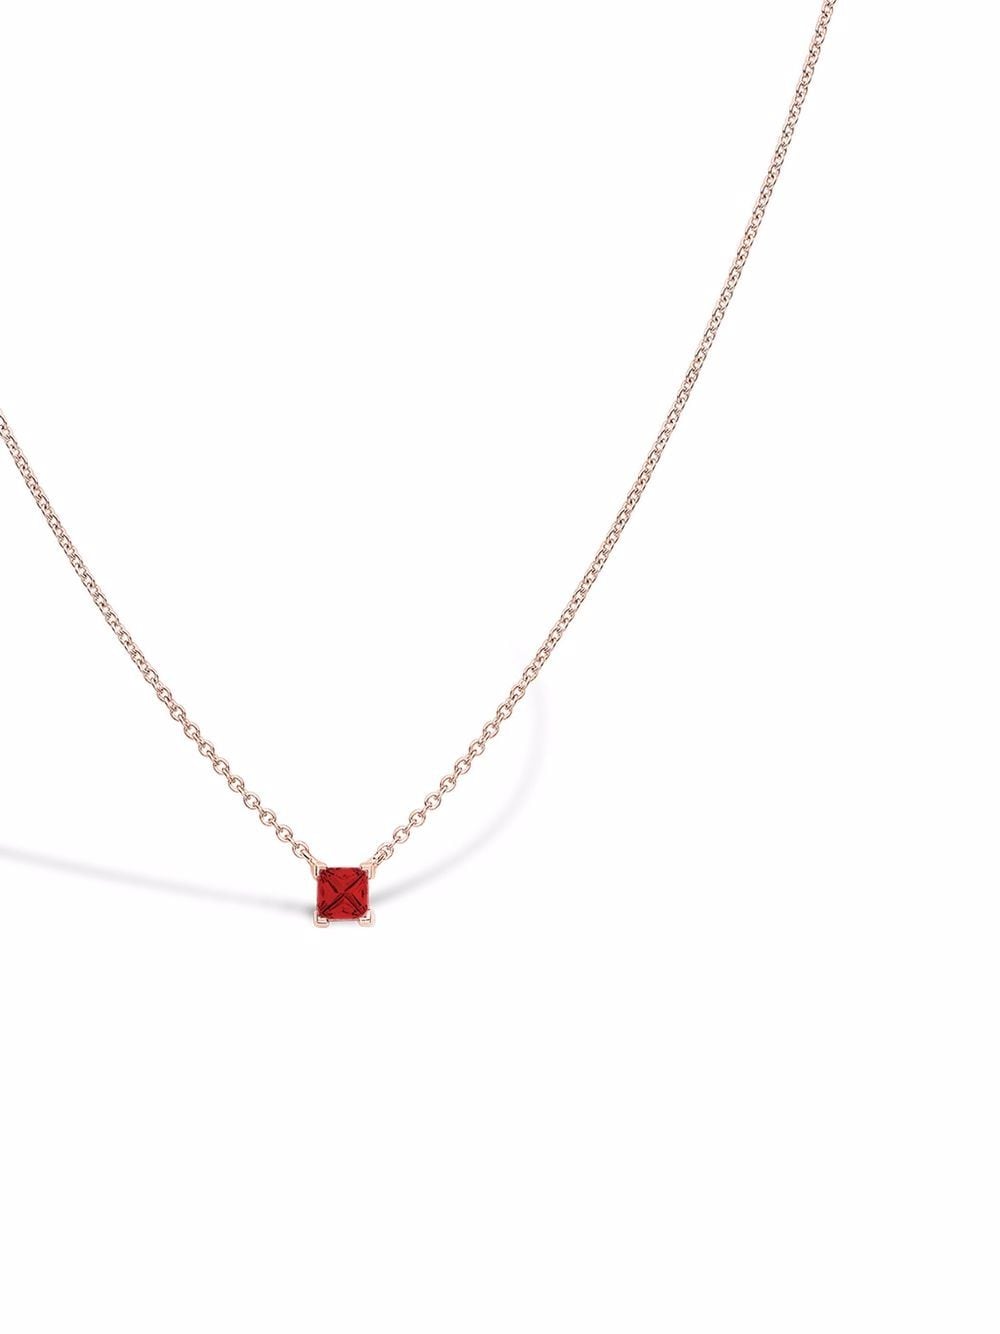 Image 2 of Pragnell 18kt rose gold RockChic ruby solitaire necklace